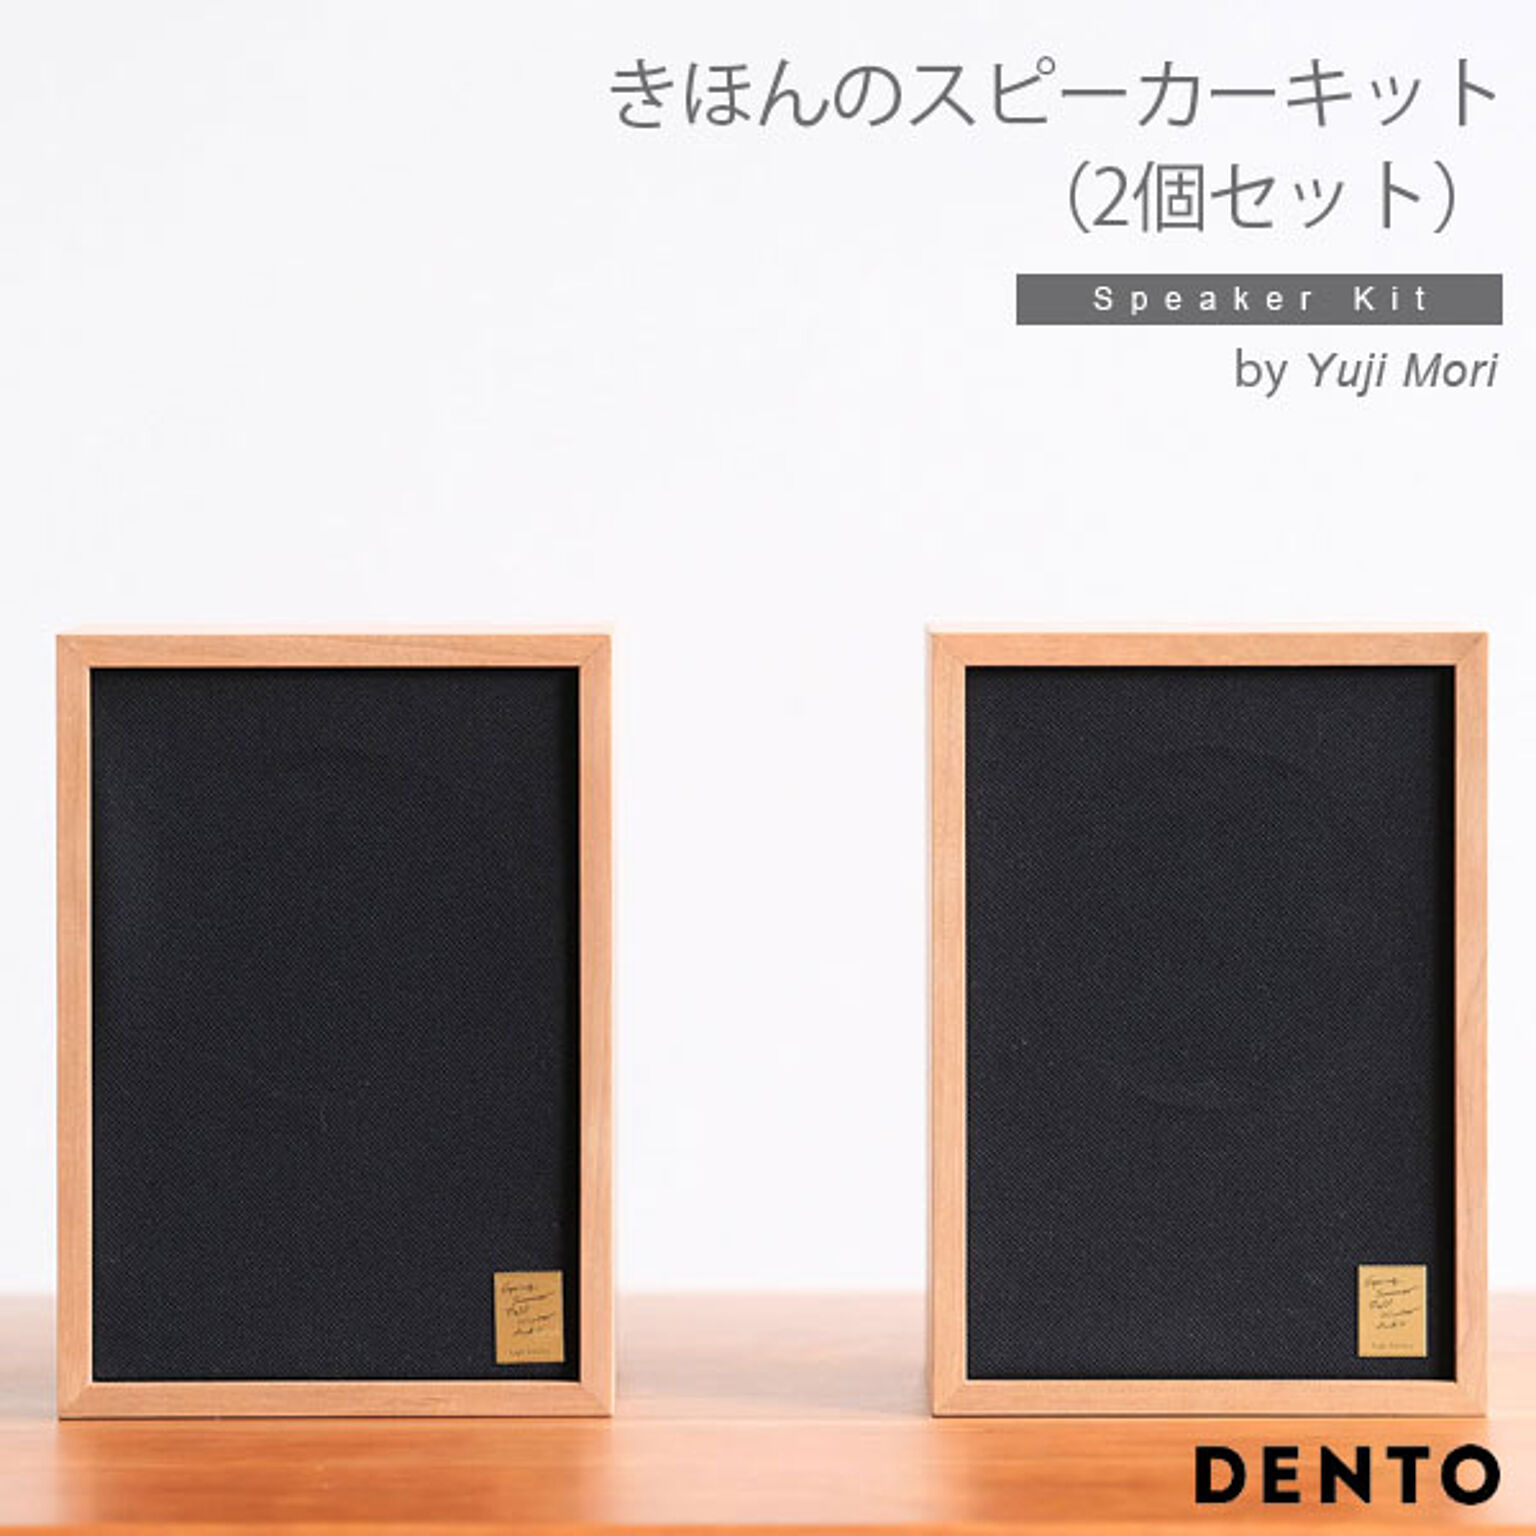 DENTO きほんのスピーカーキット（2個セット）